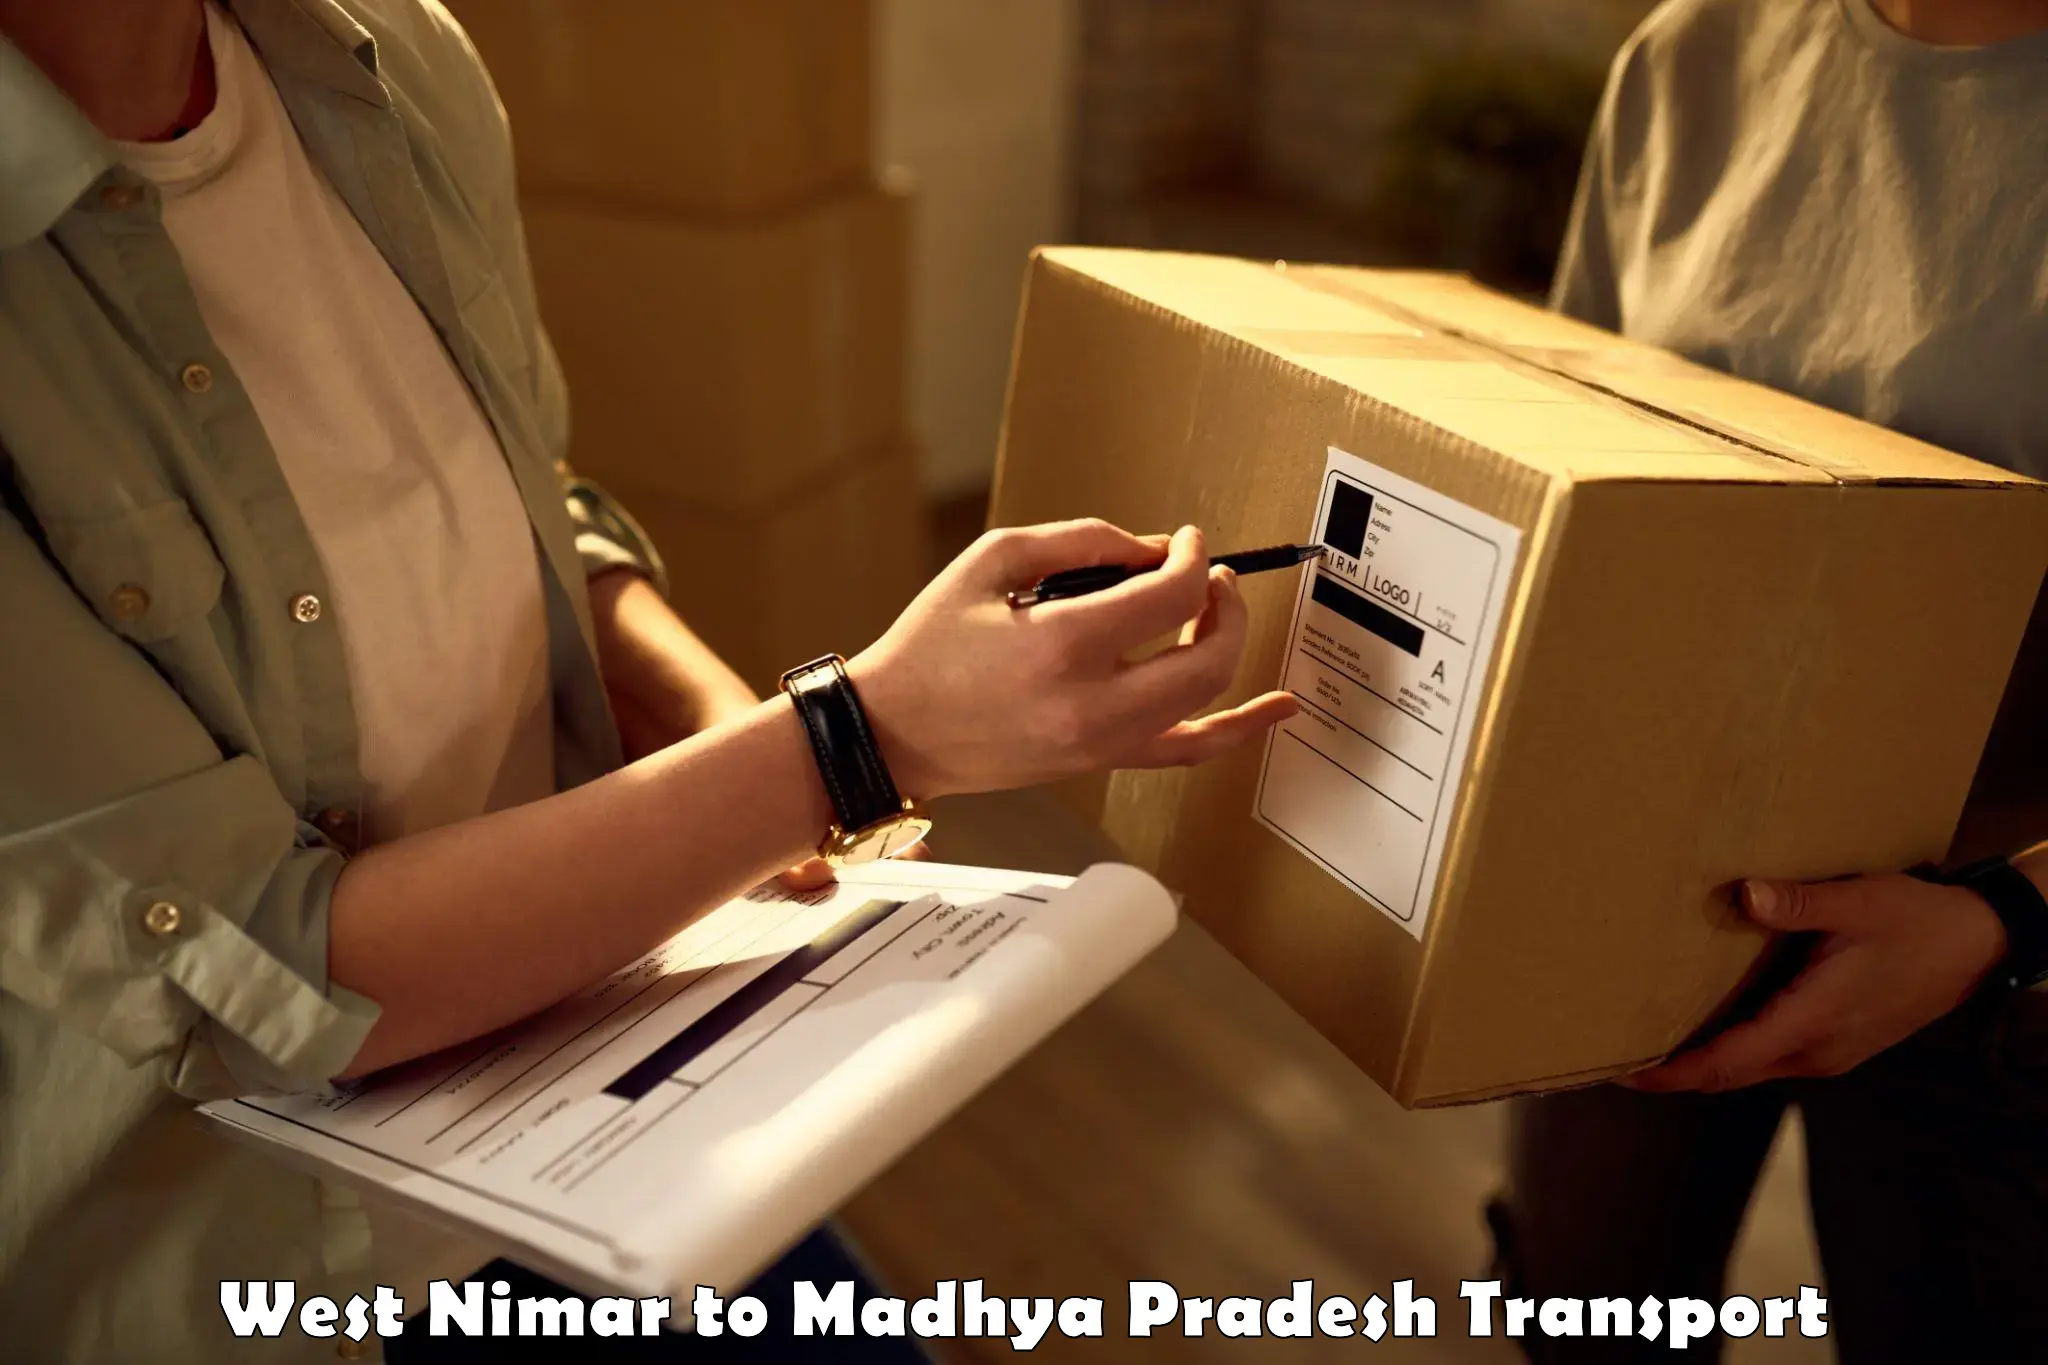 Delivery service West Nimar to Bhind